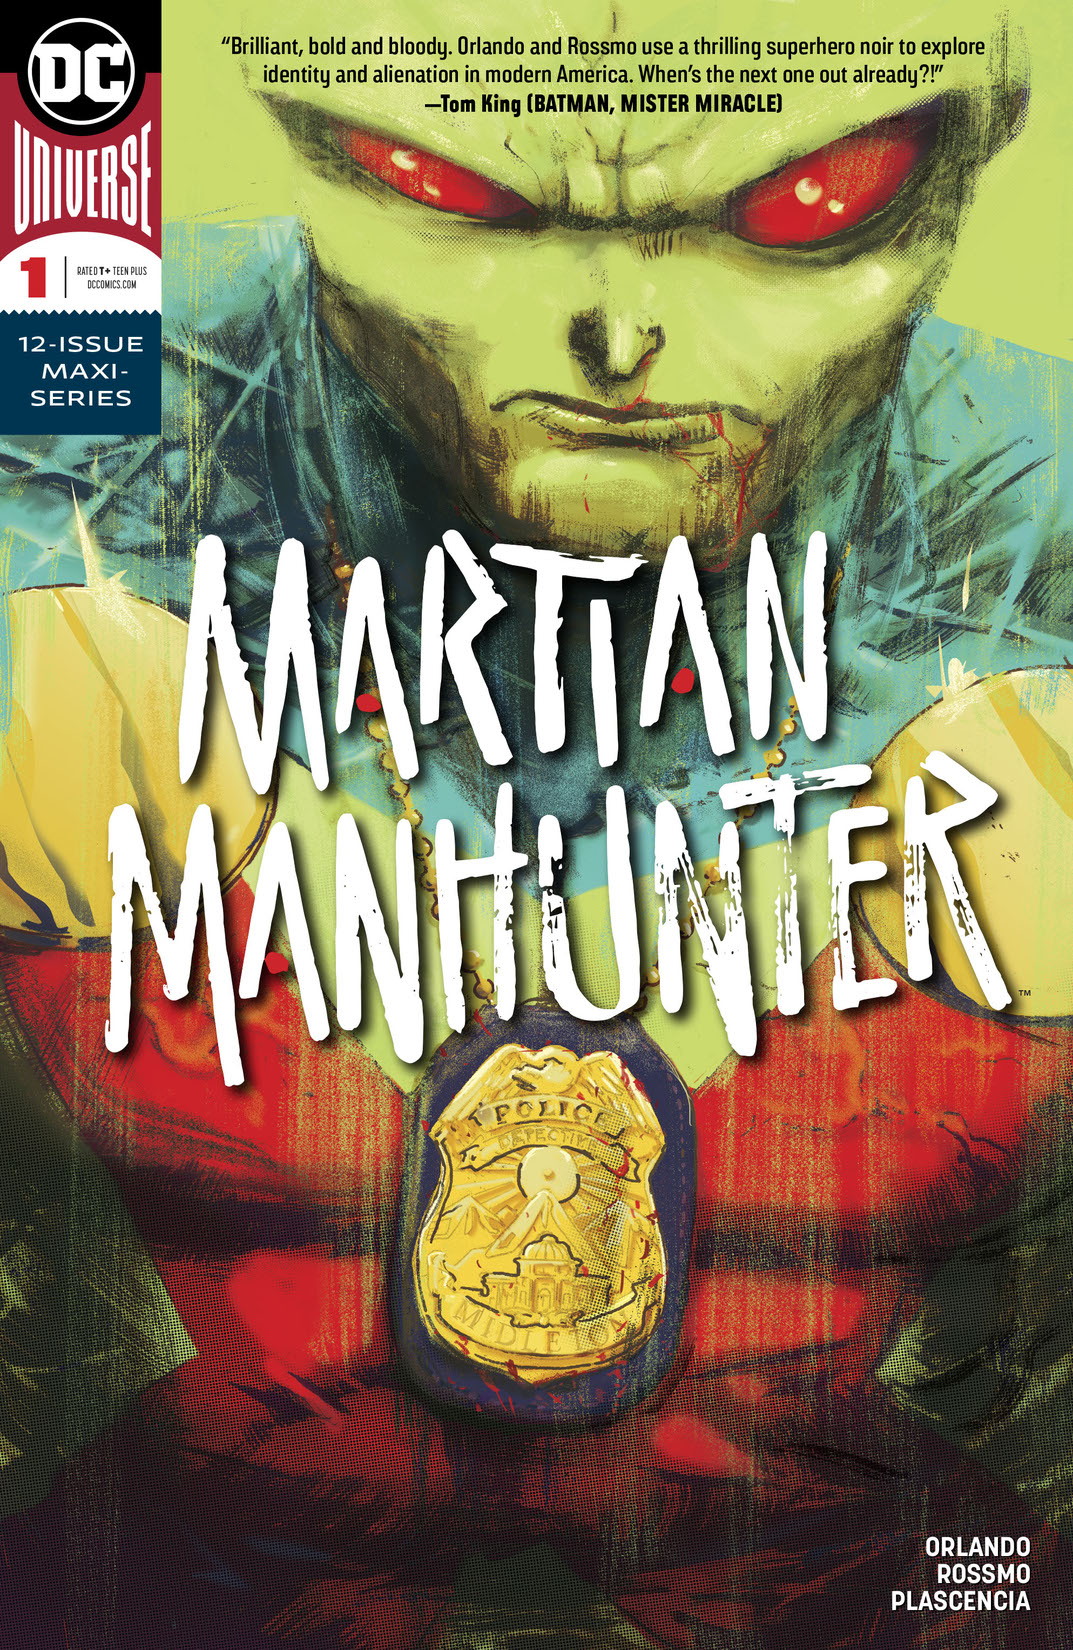 Martian Manhunter (2018-) #1 preview images